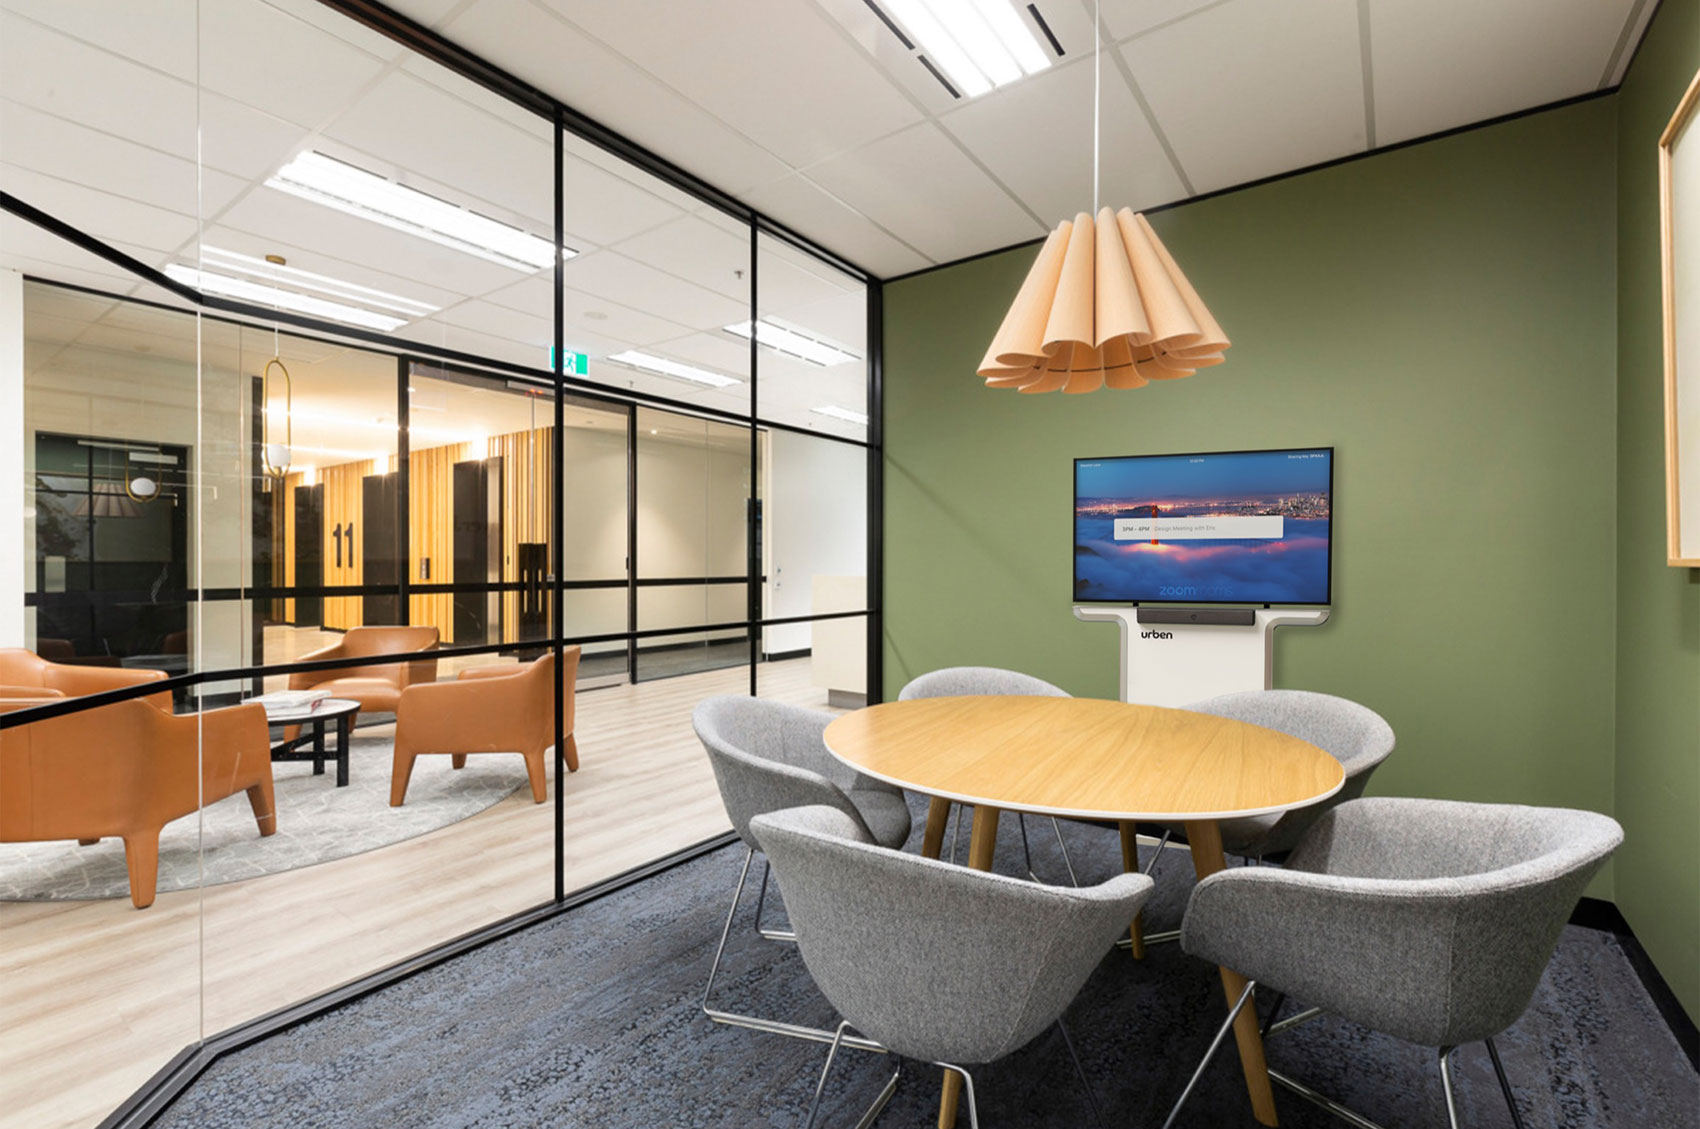 5 Crestron Huddle Room Solutions You Need